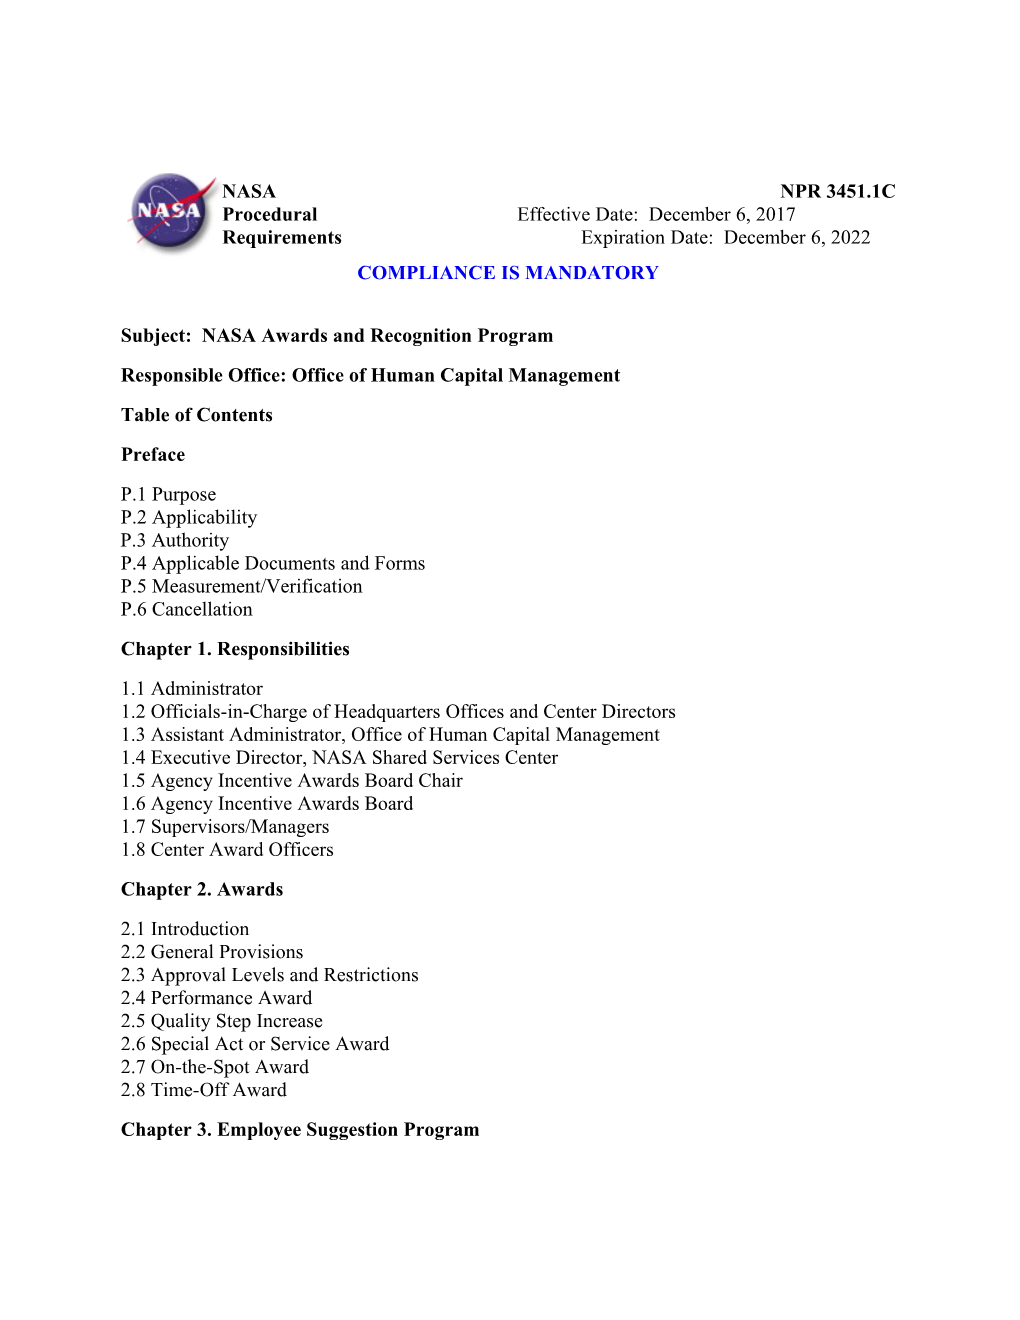 Subject: NASA Awards and Recognition Program